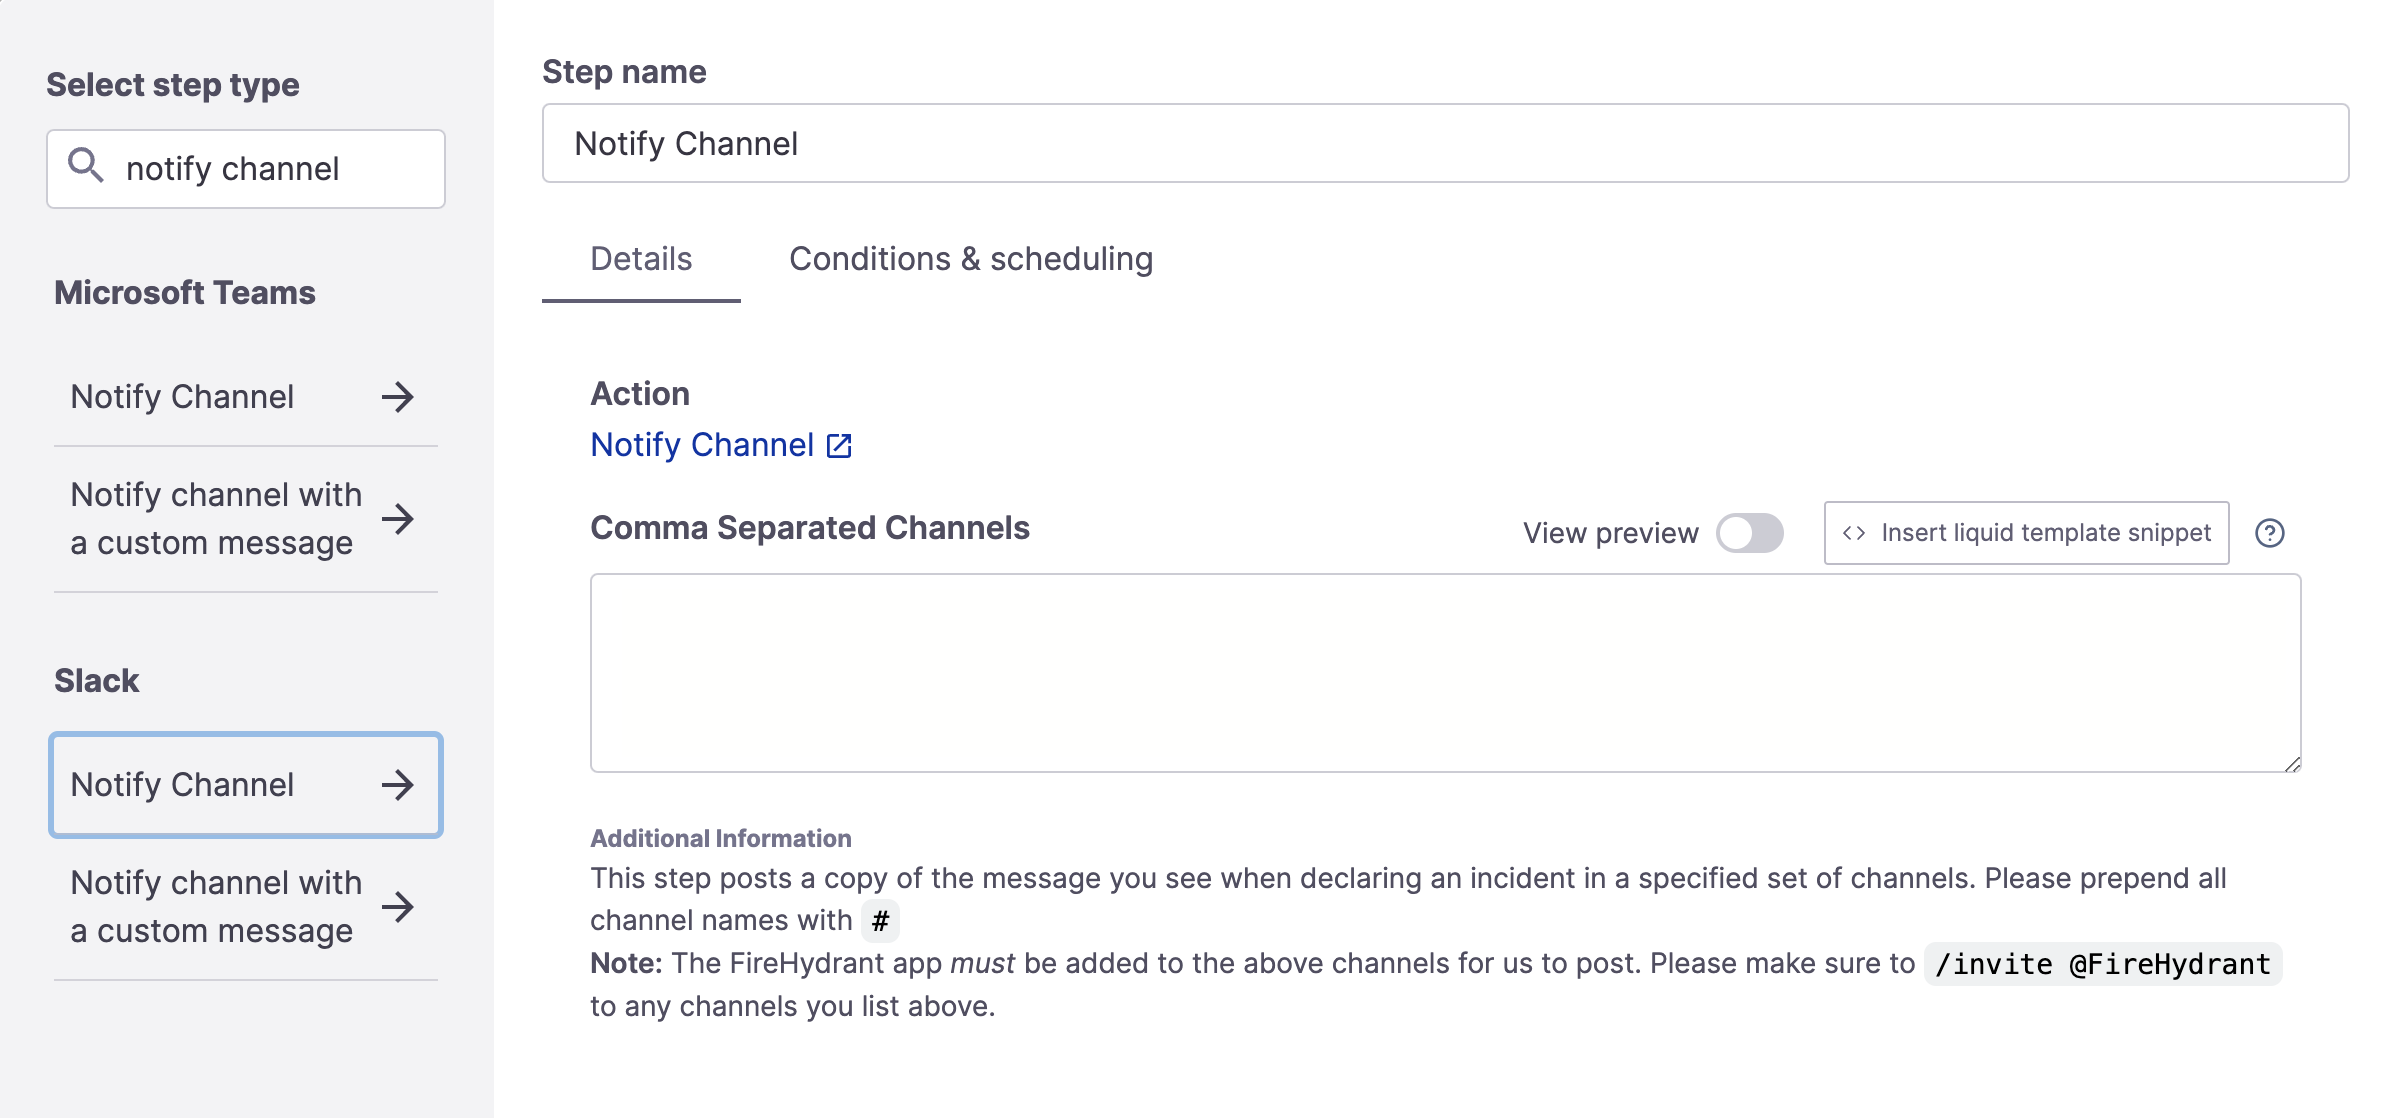 Notify Channel step. The step looks identical for both Slack and Microsoft Teams